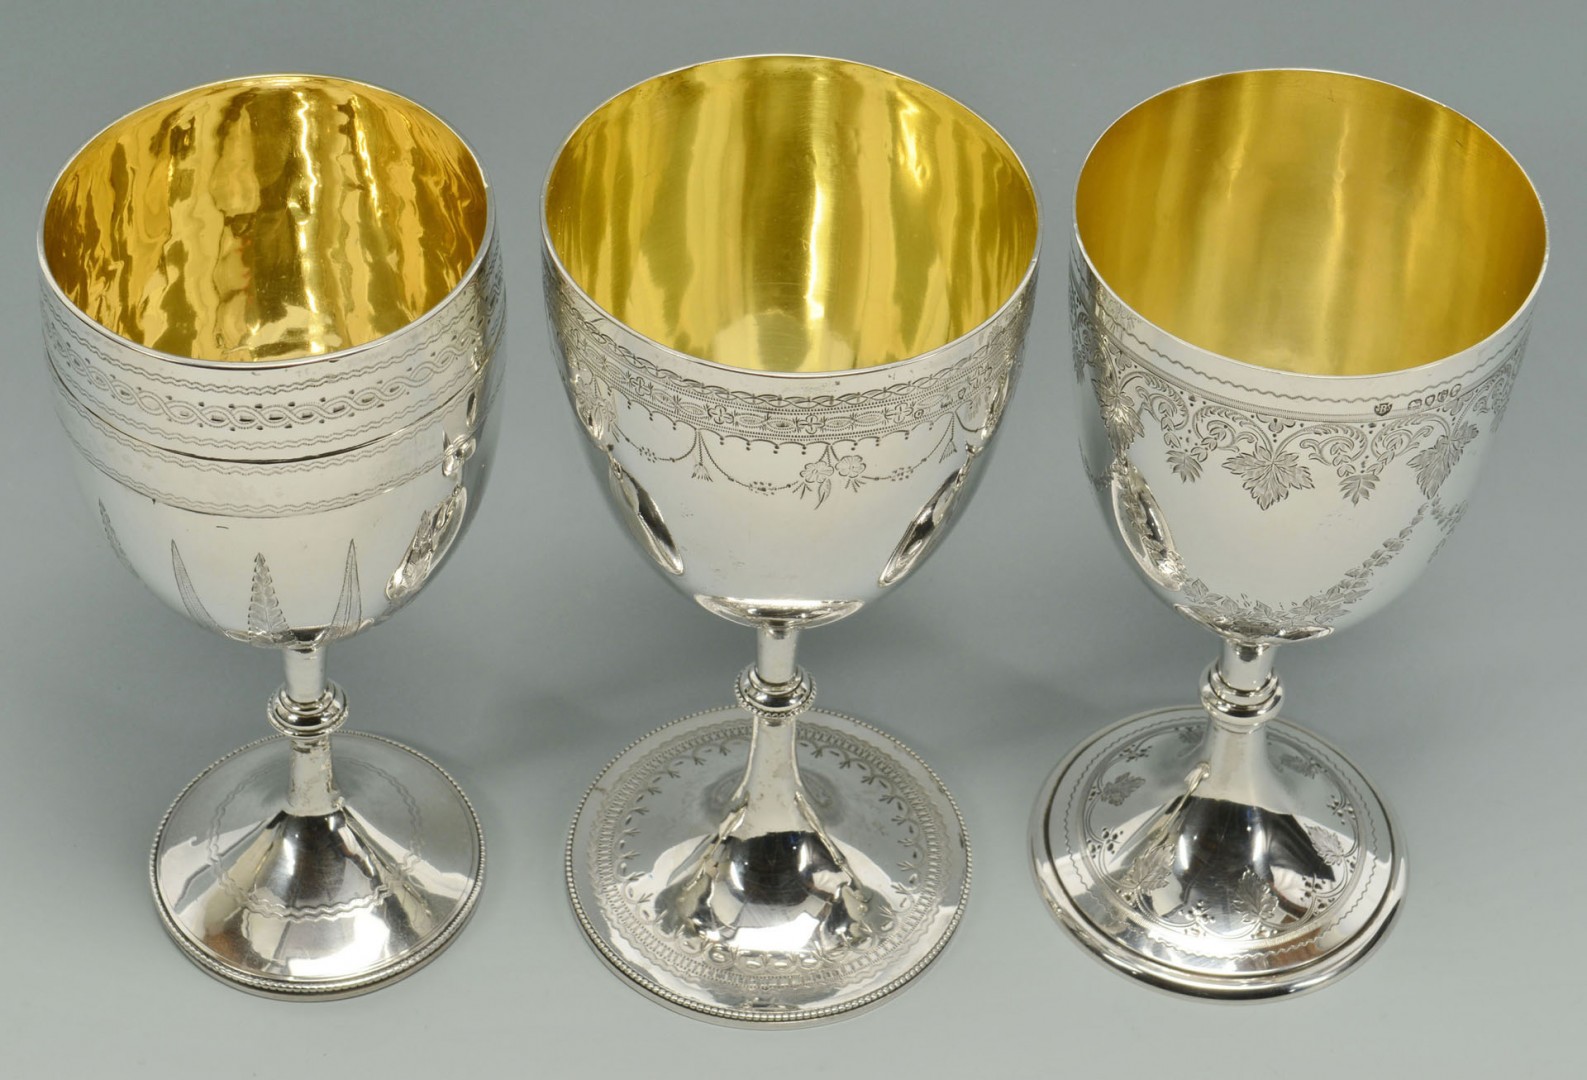 Lot 95: 3 Victorian Silver Chalice Goblets